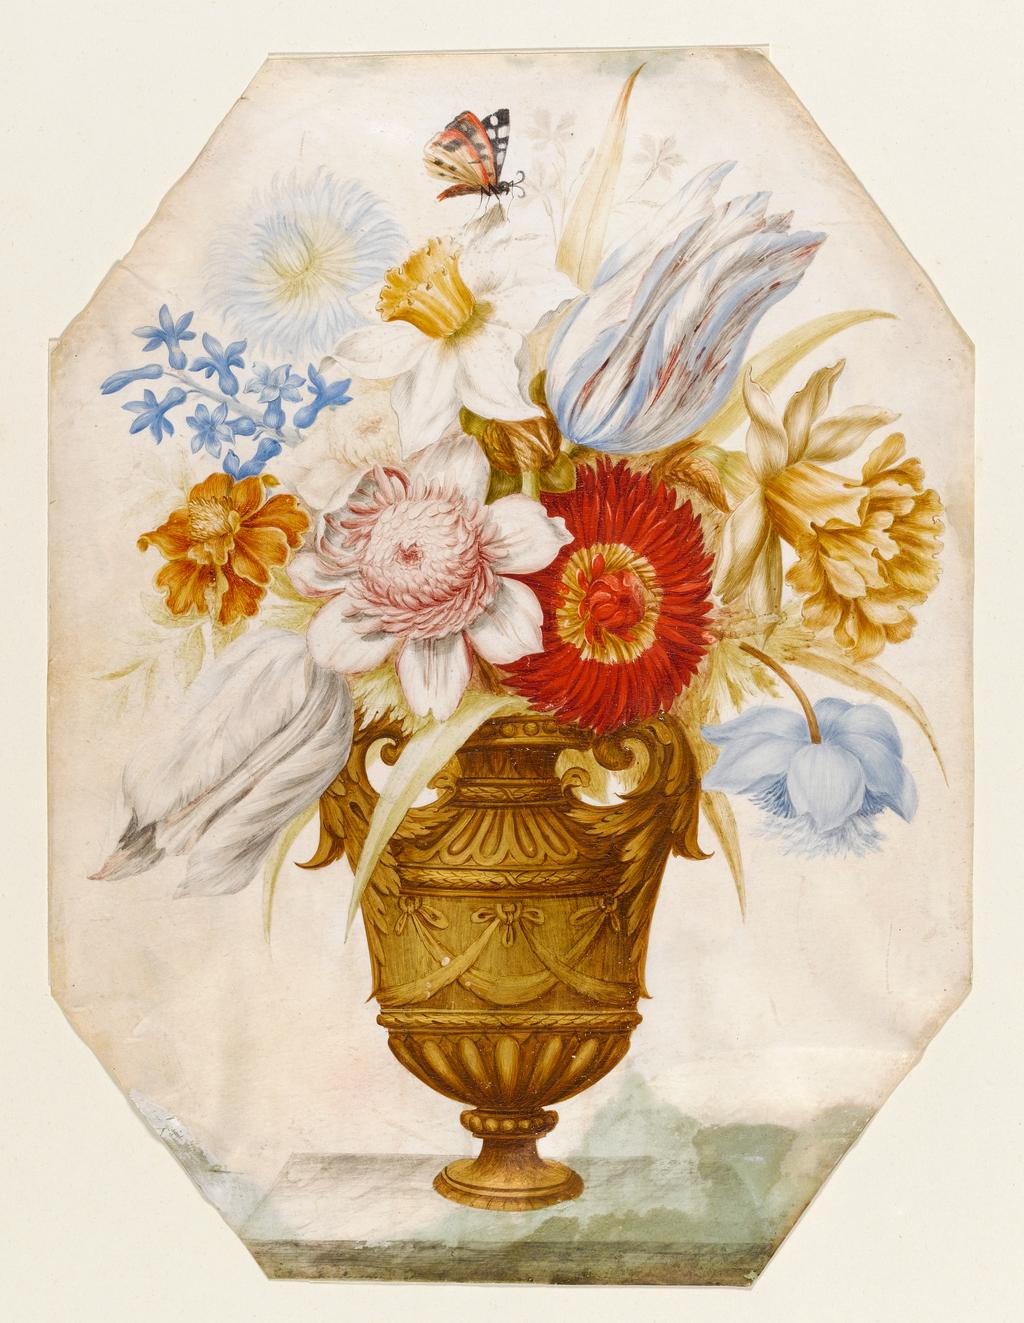 An image of Title/s Still-life: flowers in a vase which stands on a ledge with a bufferfly resting on narcissi Maker/s Robert, Nicolas (draughtsman) [ULAN info: French artist, 1614-1685] Category drawing Name drawing School/Style French Technique Description  watercolour and bodycolour on vellum Dimensions height: 352 mmwidth: 264 mm Provenance bequeathed: Fairhaven, Henry Rogers Broughton 1973 (Filtered for: Paintings, Drawings and Prints)  Material/s  watercolour (medium) bodycolour (medium) vellum (skin) (support)  Accession Number  PD.905-1973 (Paintings, Drawings and Prints)